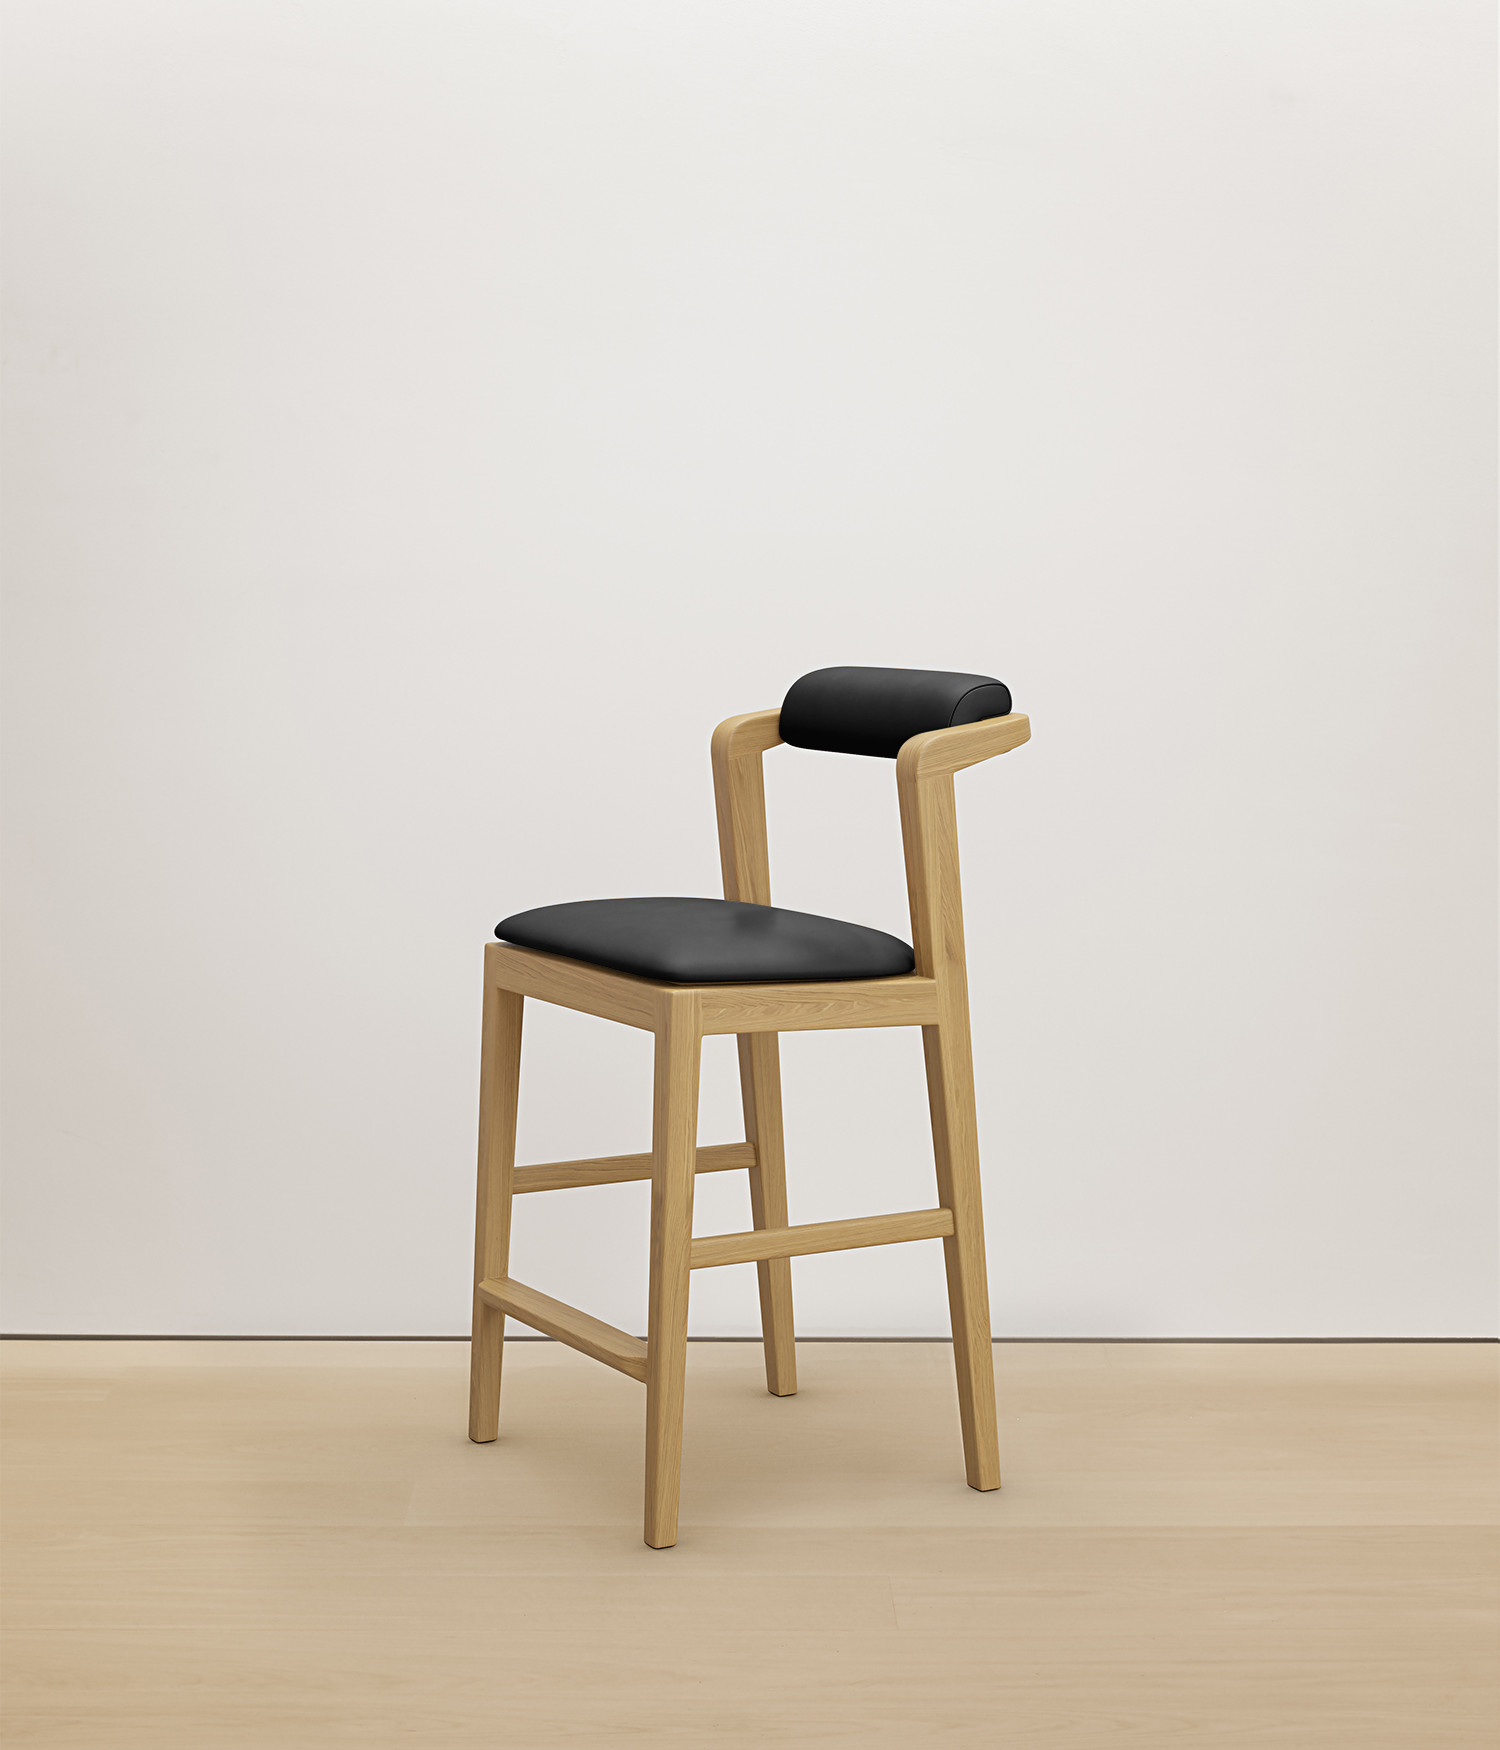  white-oak stool with black color upholstered seat